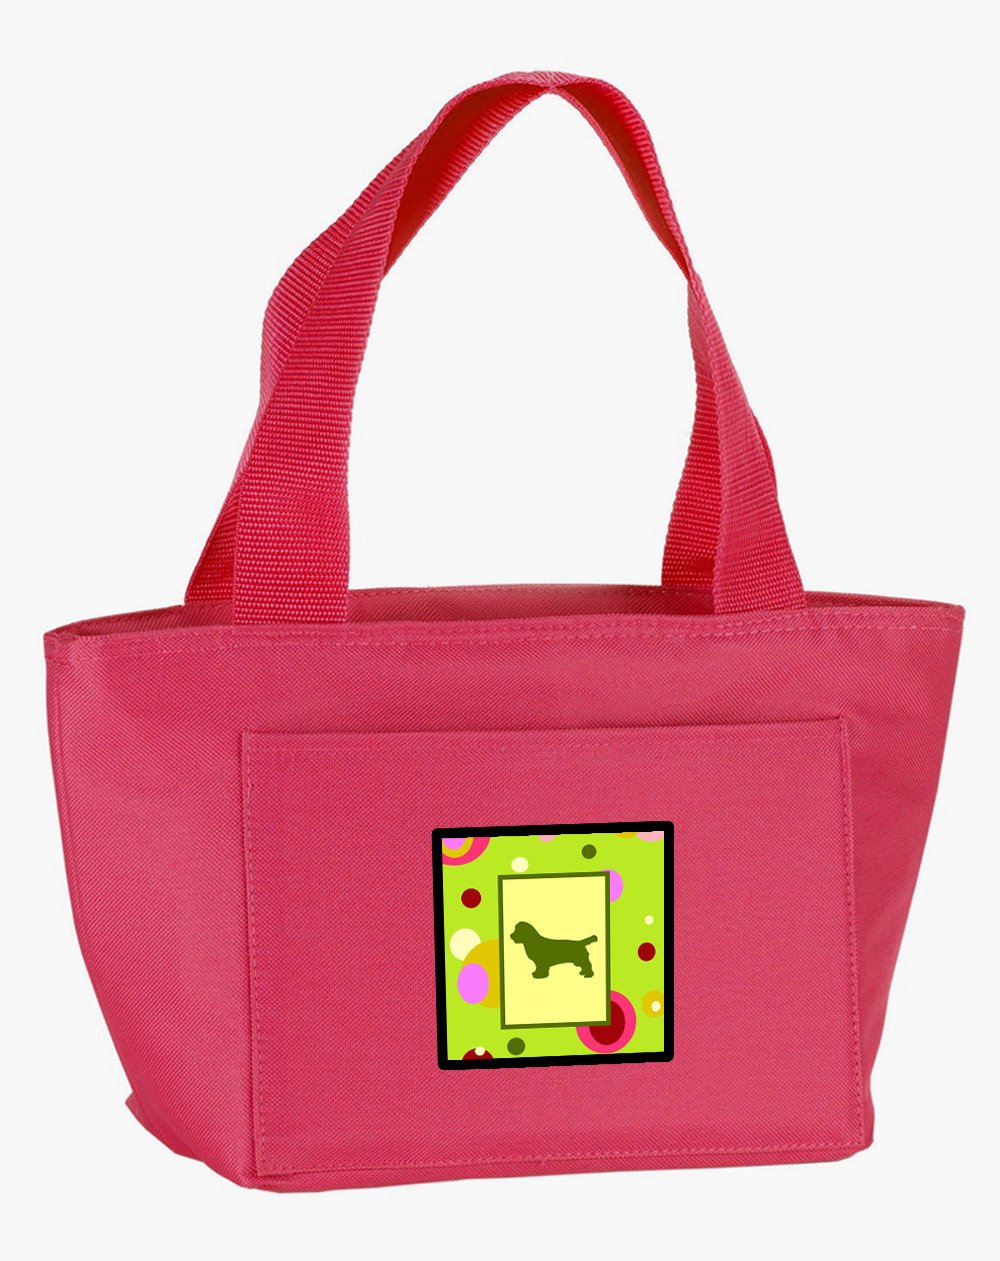 Lime Green Dots Sussex Spaniel  Lunch Bag CK1061PK-8808 by Caroline's Treasures